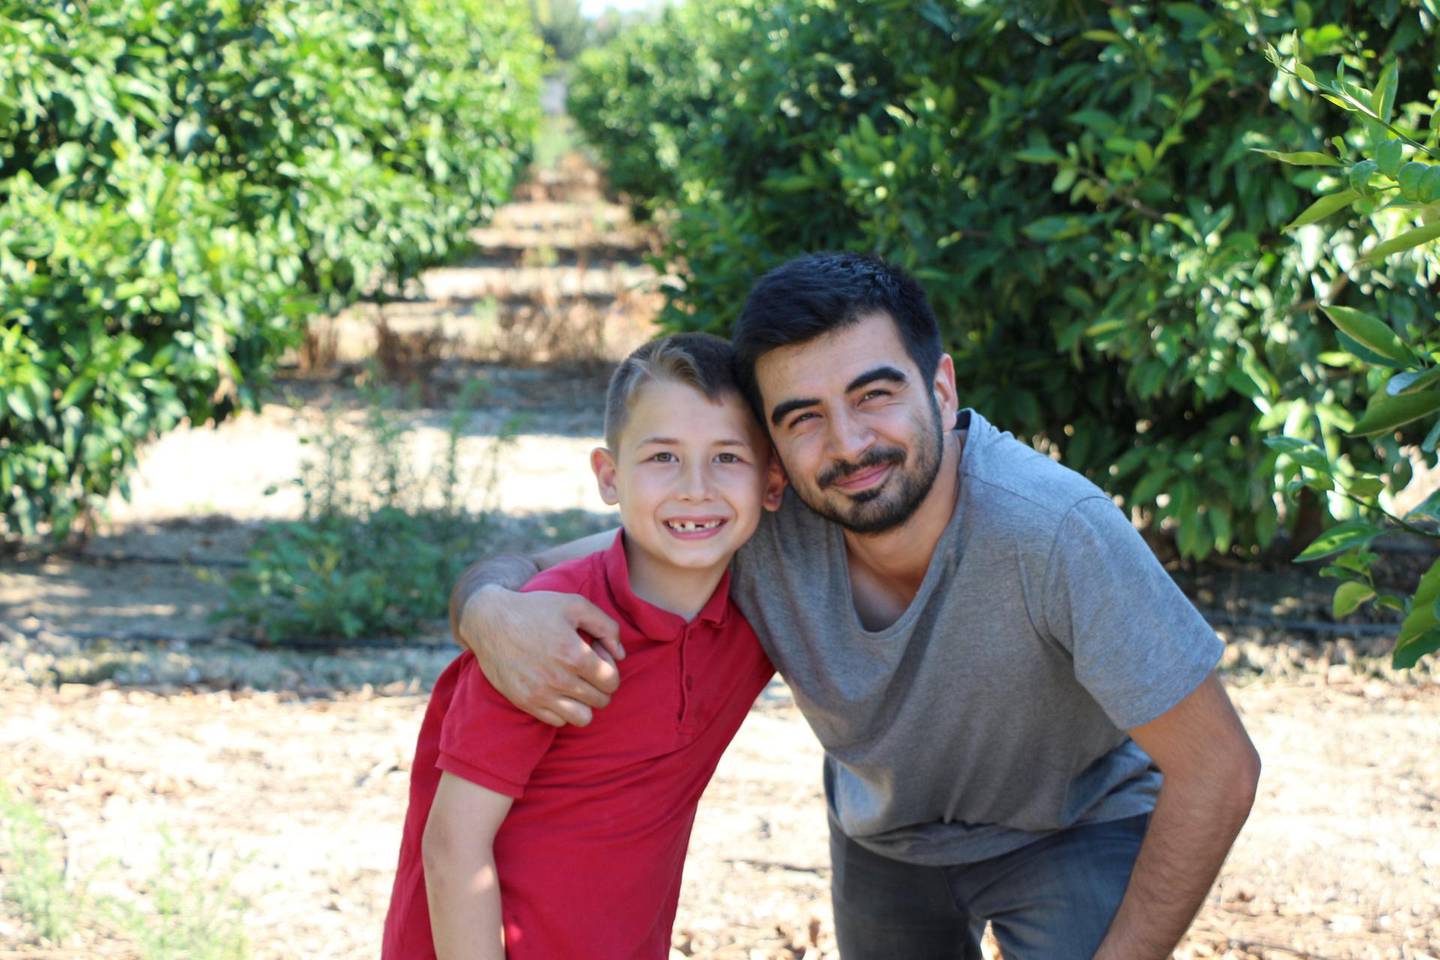 Ata Cengiz has developed a website that allows people to buy their own tree and track its yield 